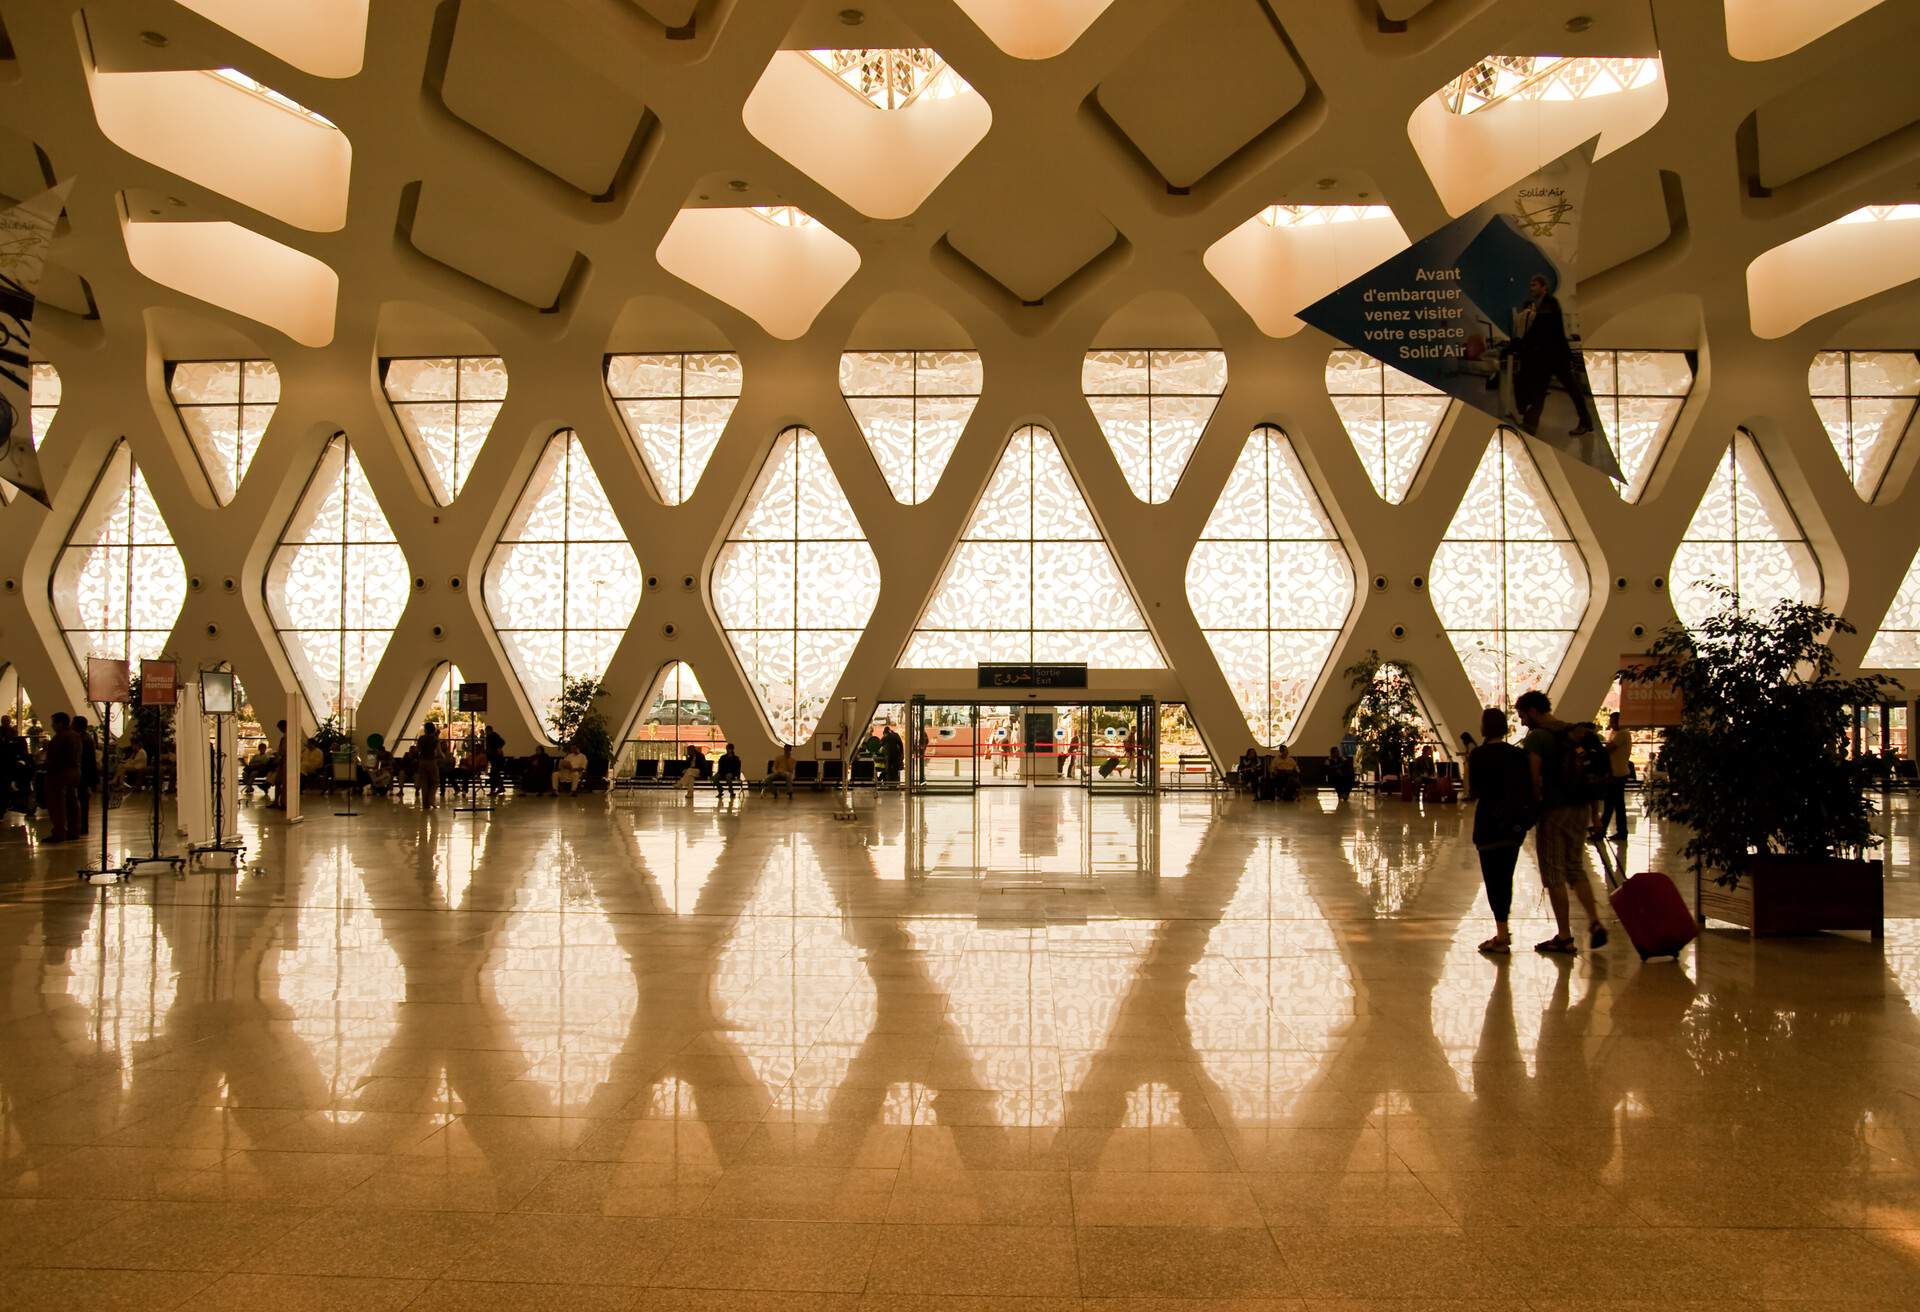 marrakech airport architecture reflection light couple suitcase travel travelling departure walking baggage africa windows entrance floor people person travel trip tour route holidays vacations adventure shape